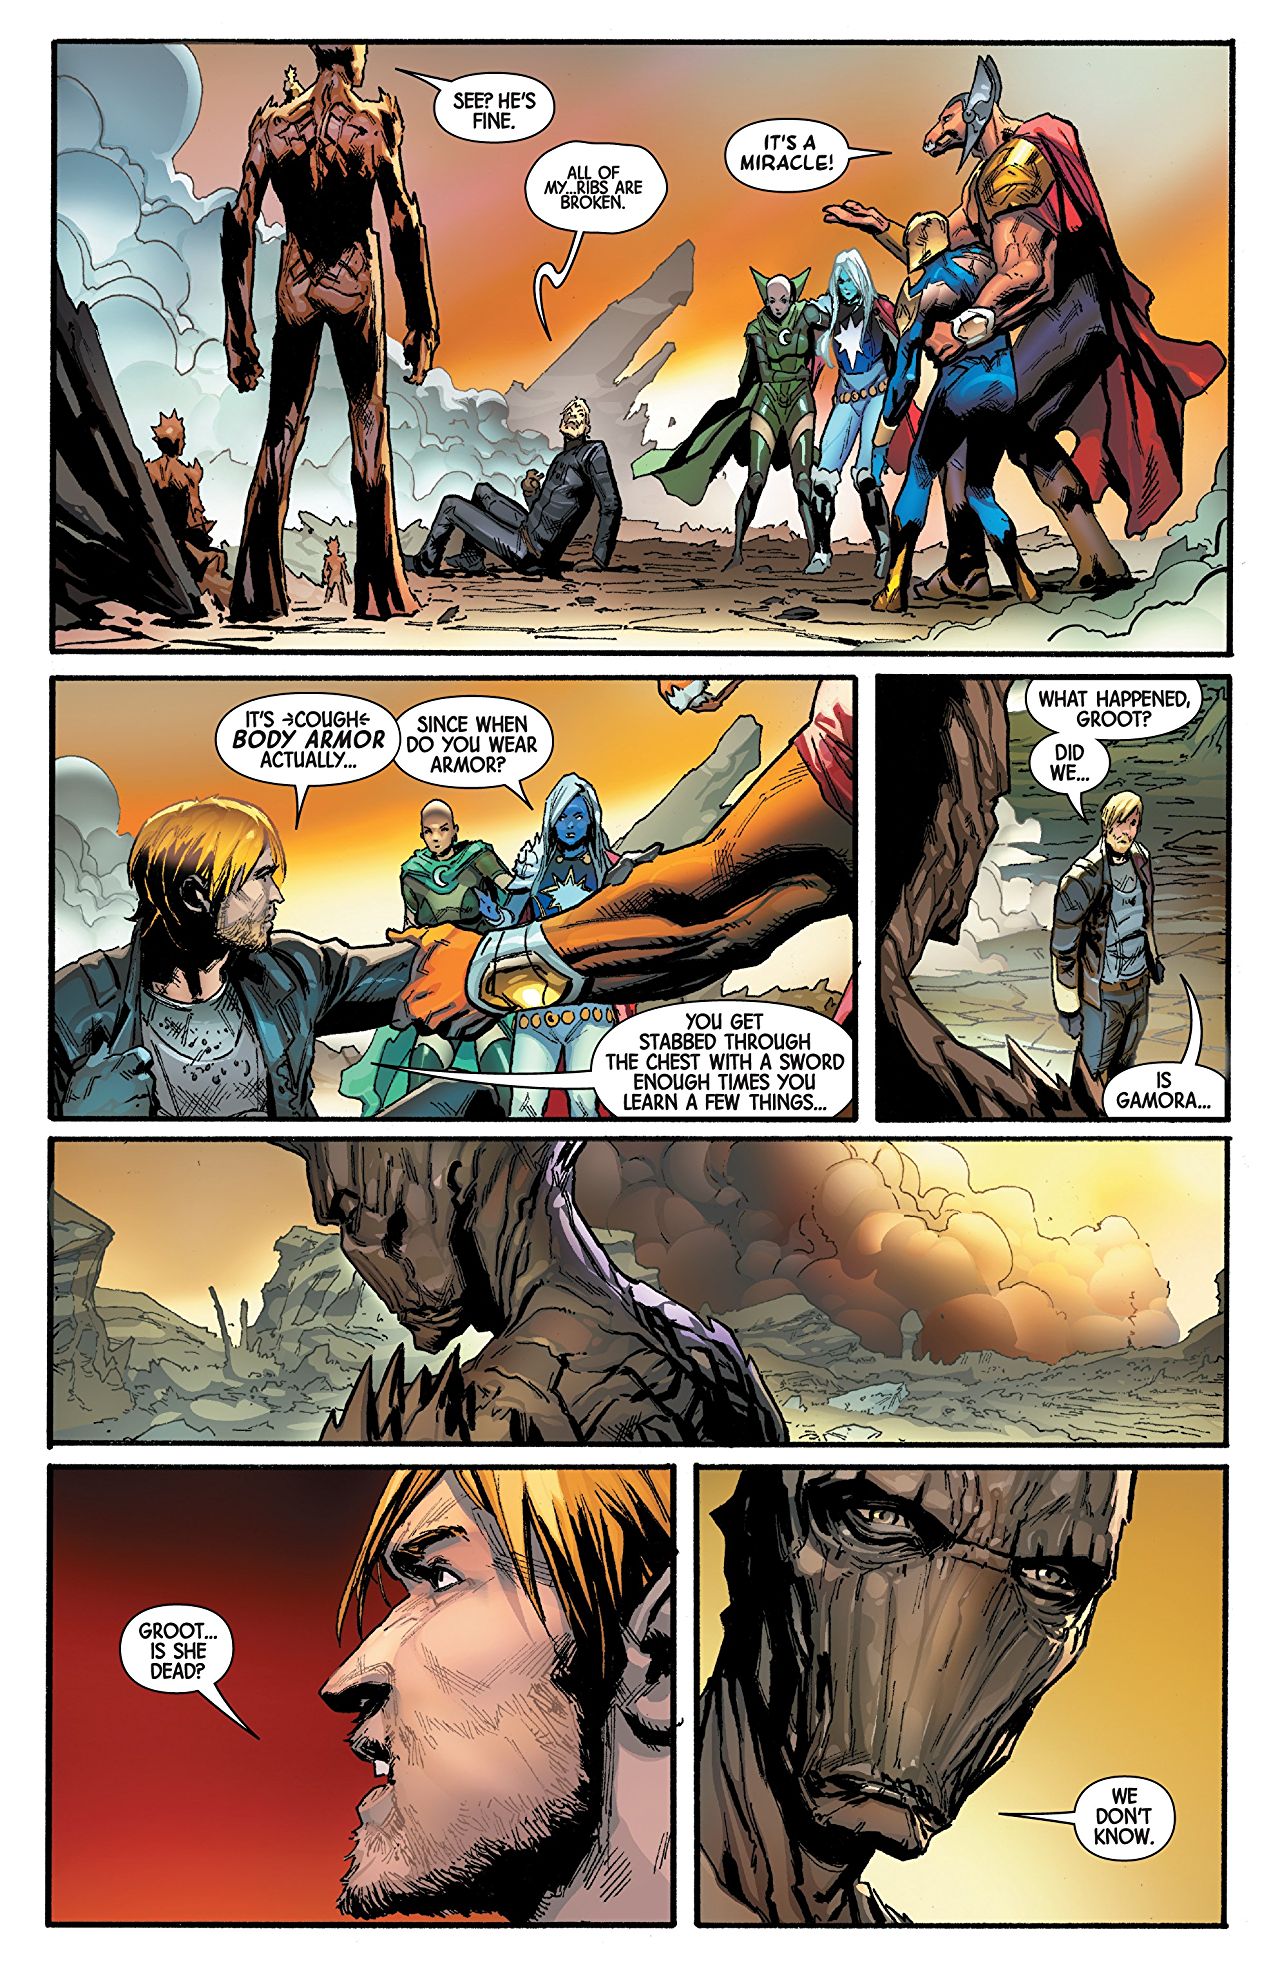 Guardians of the Galaxy #5 Review